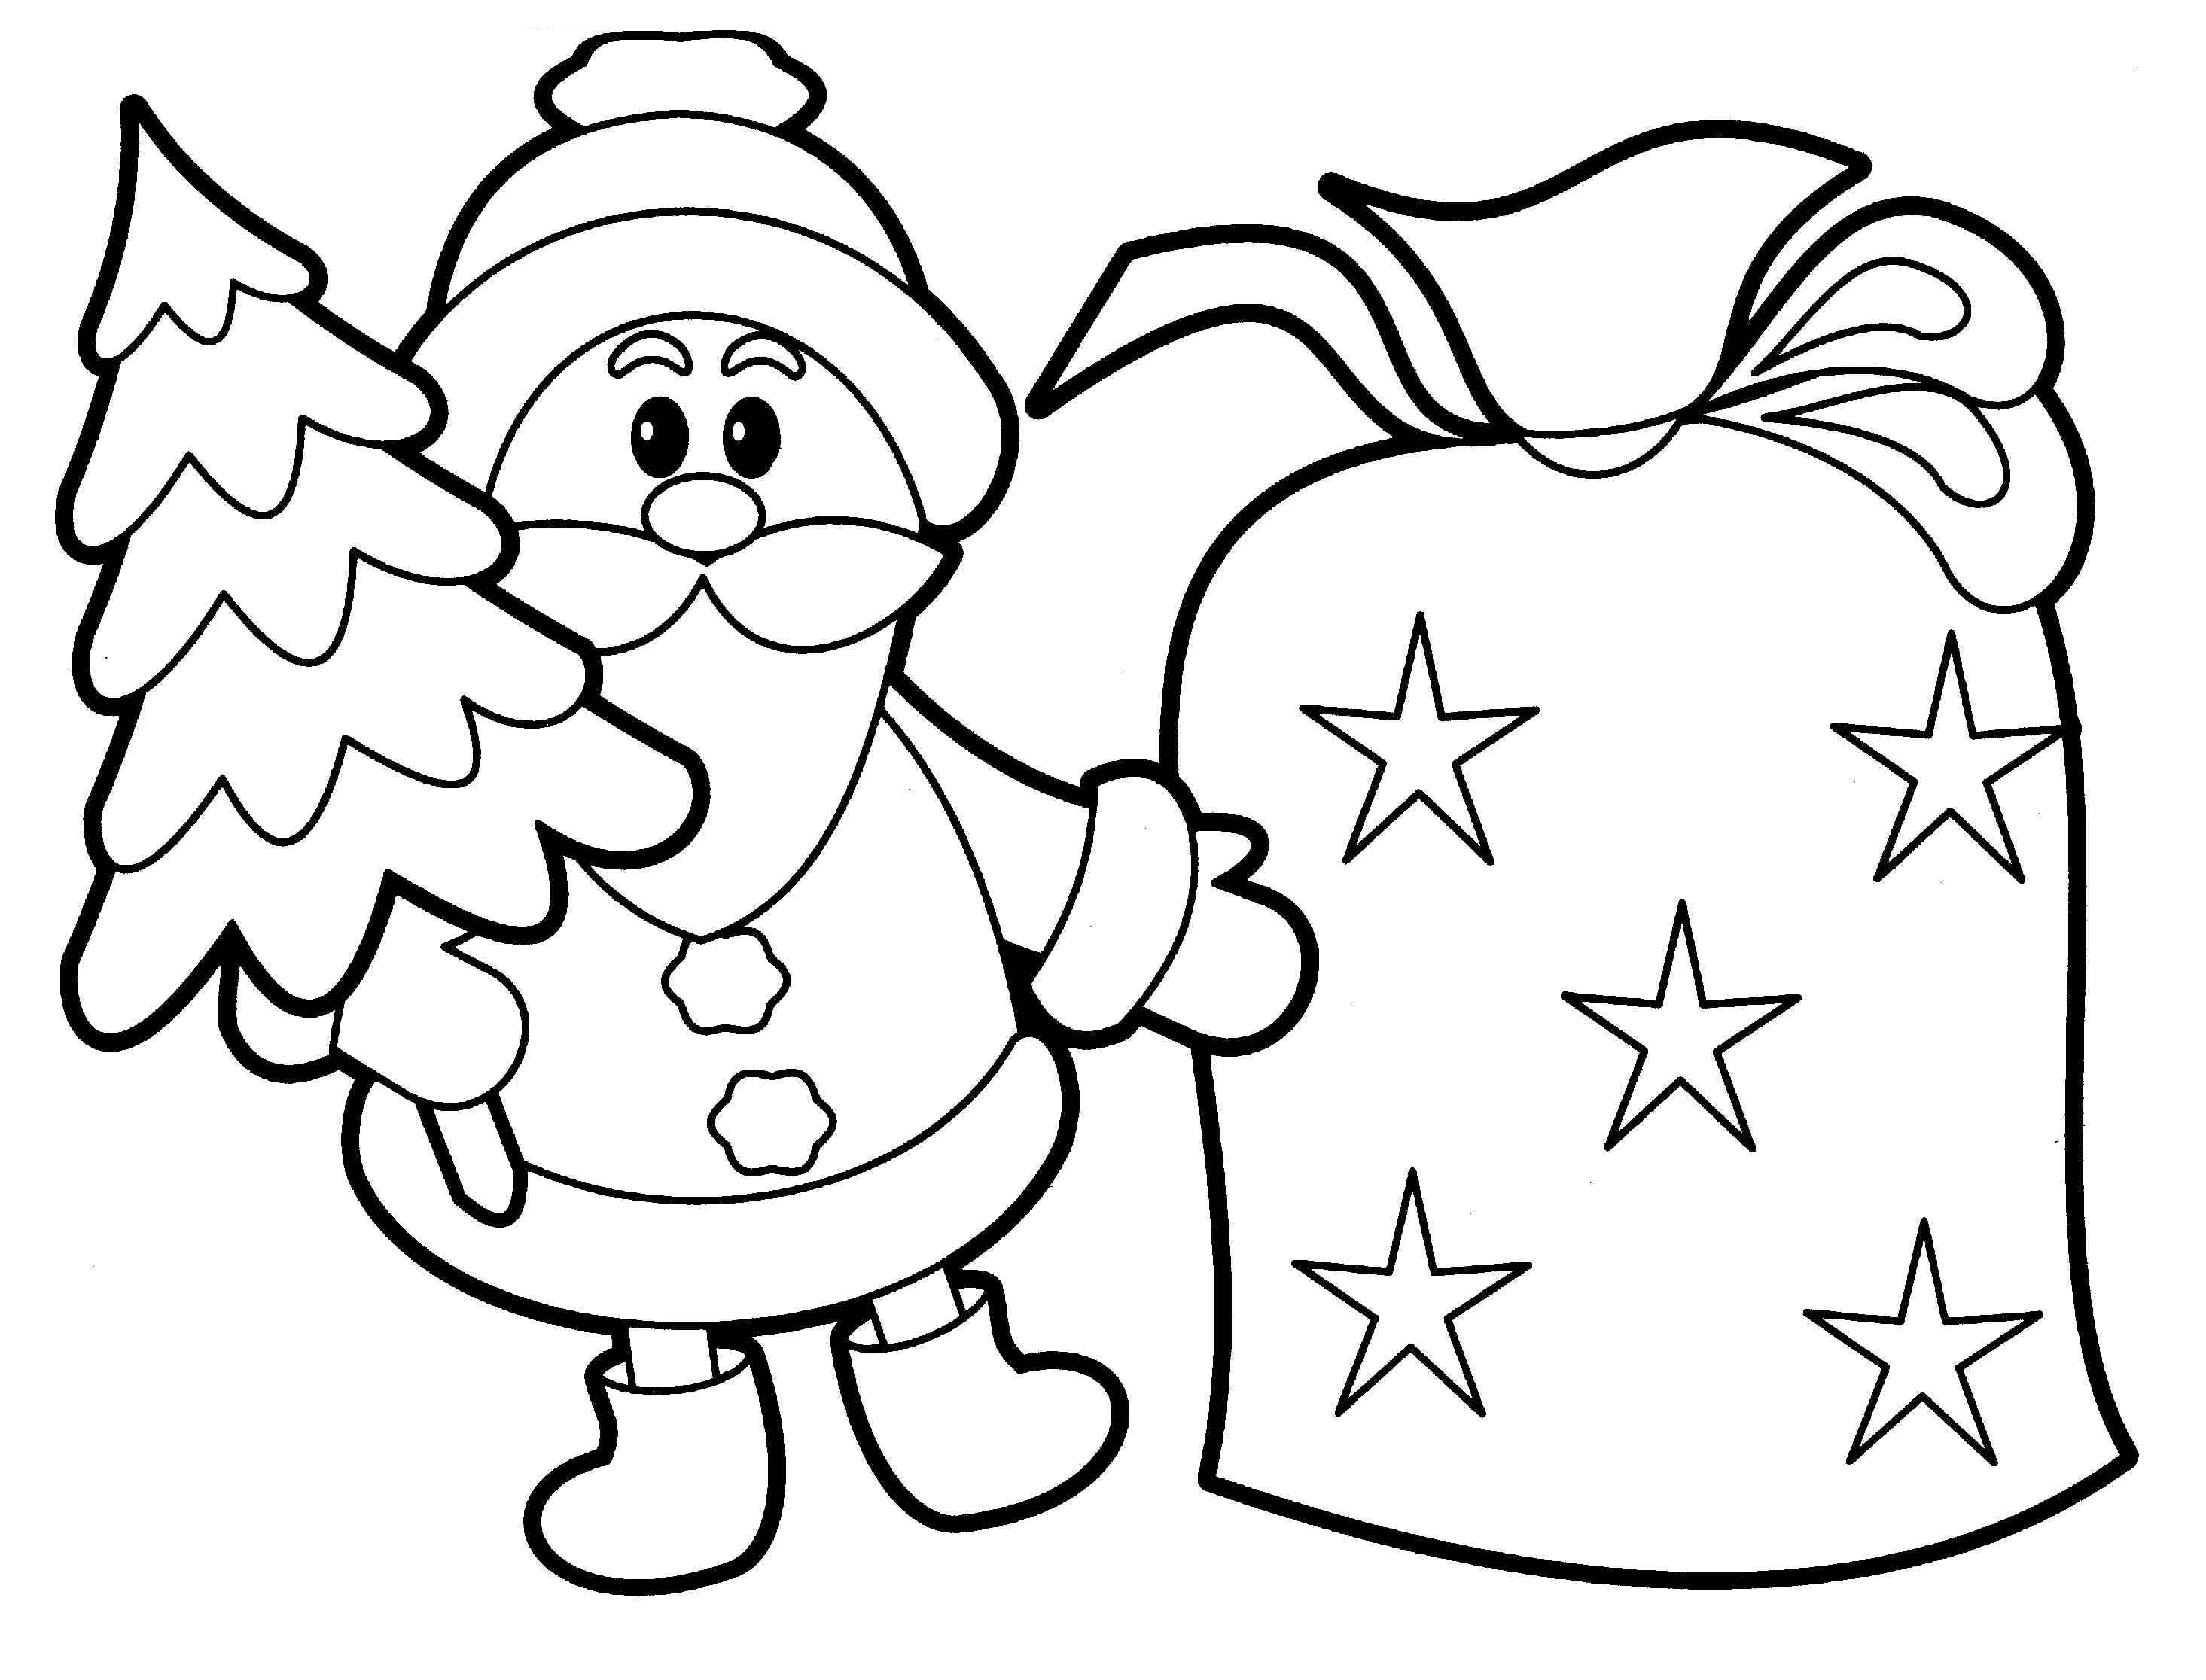 Christmas Coloring Gifts Pages Book Kids Boys - Colorine.net | #15284